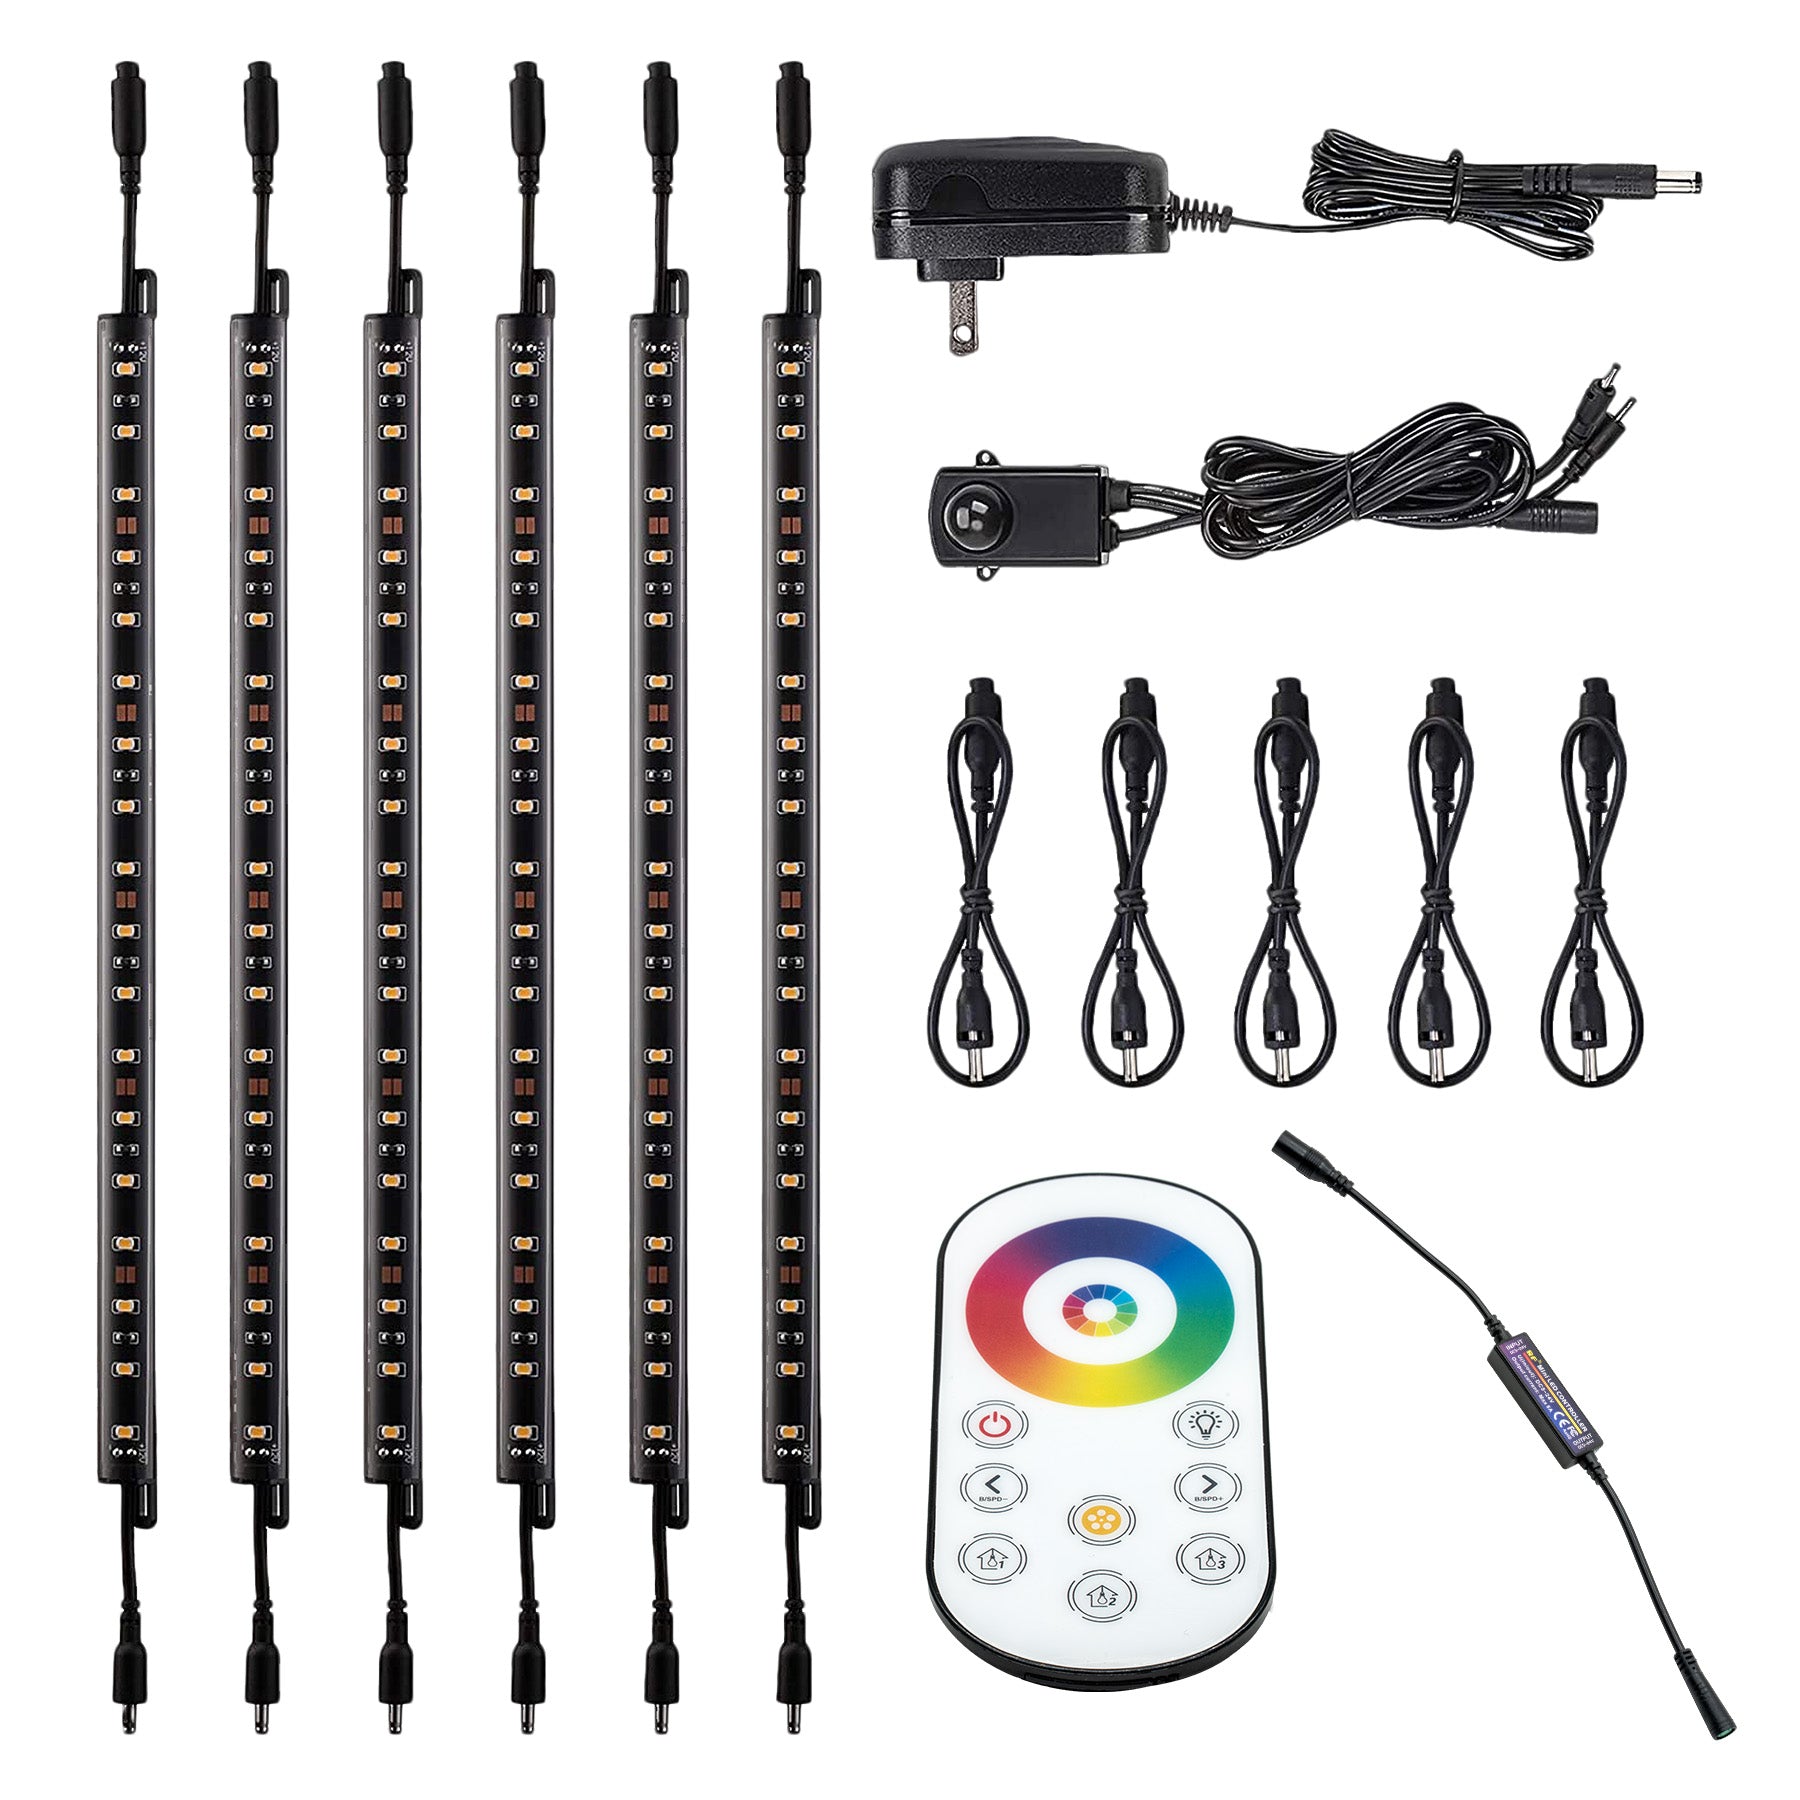 Clearview Multicolor Lights Accessory with Remote - Six Wands